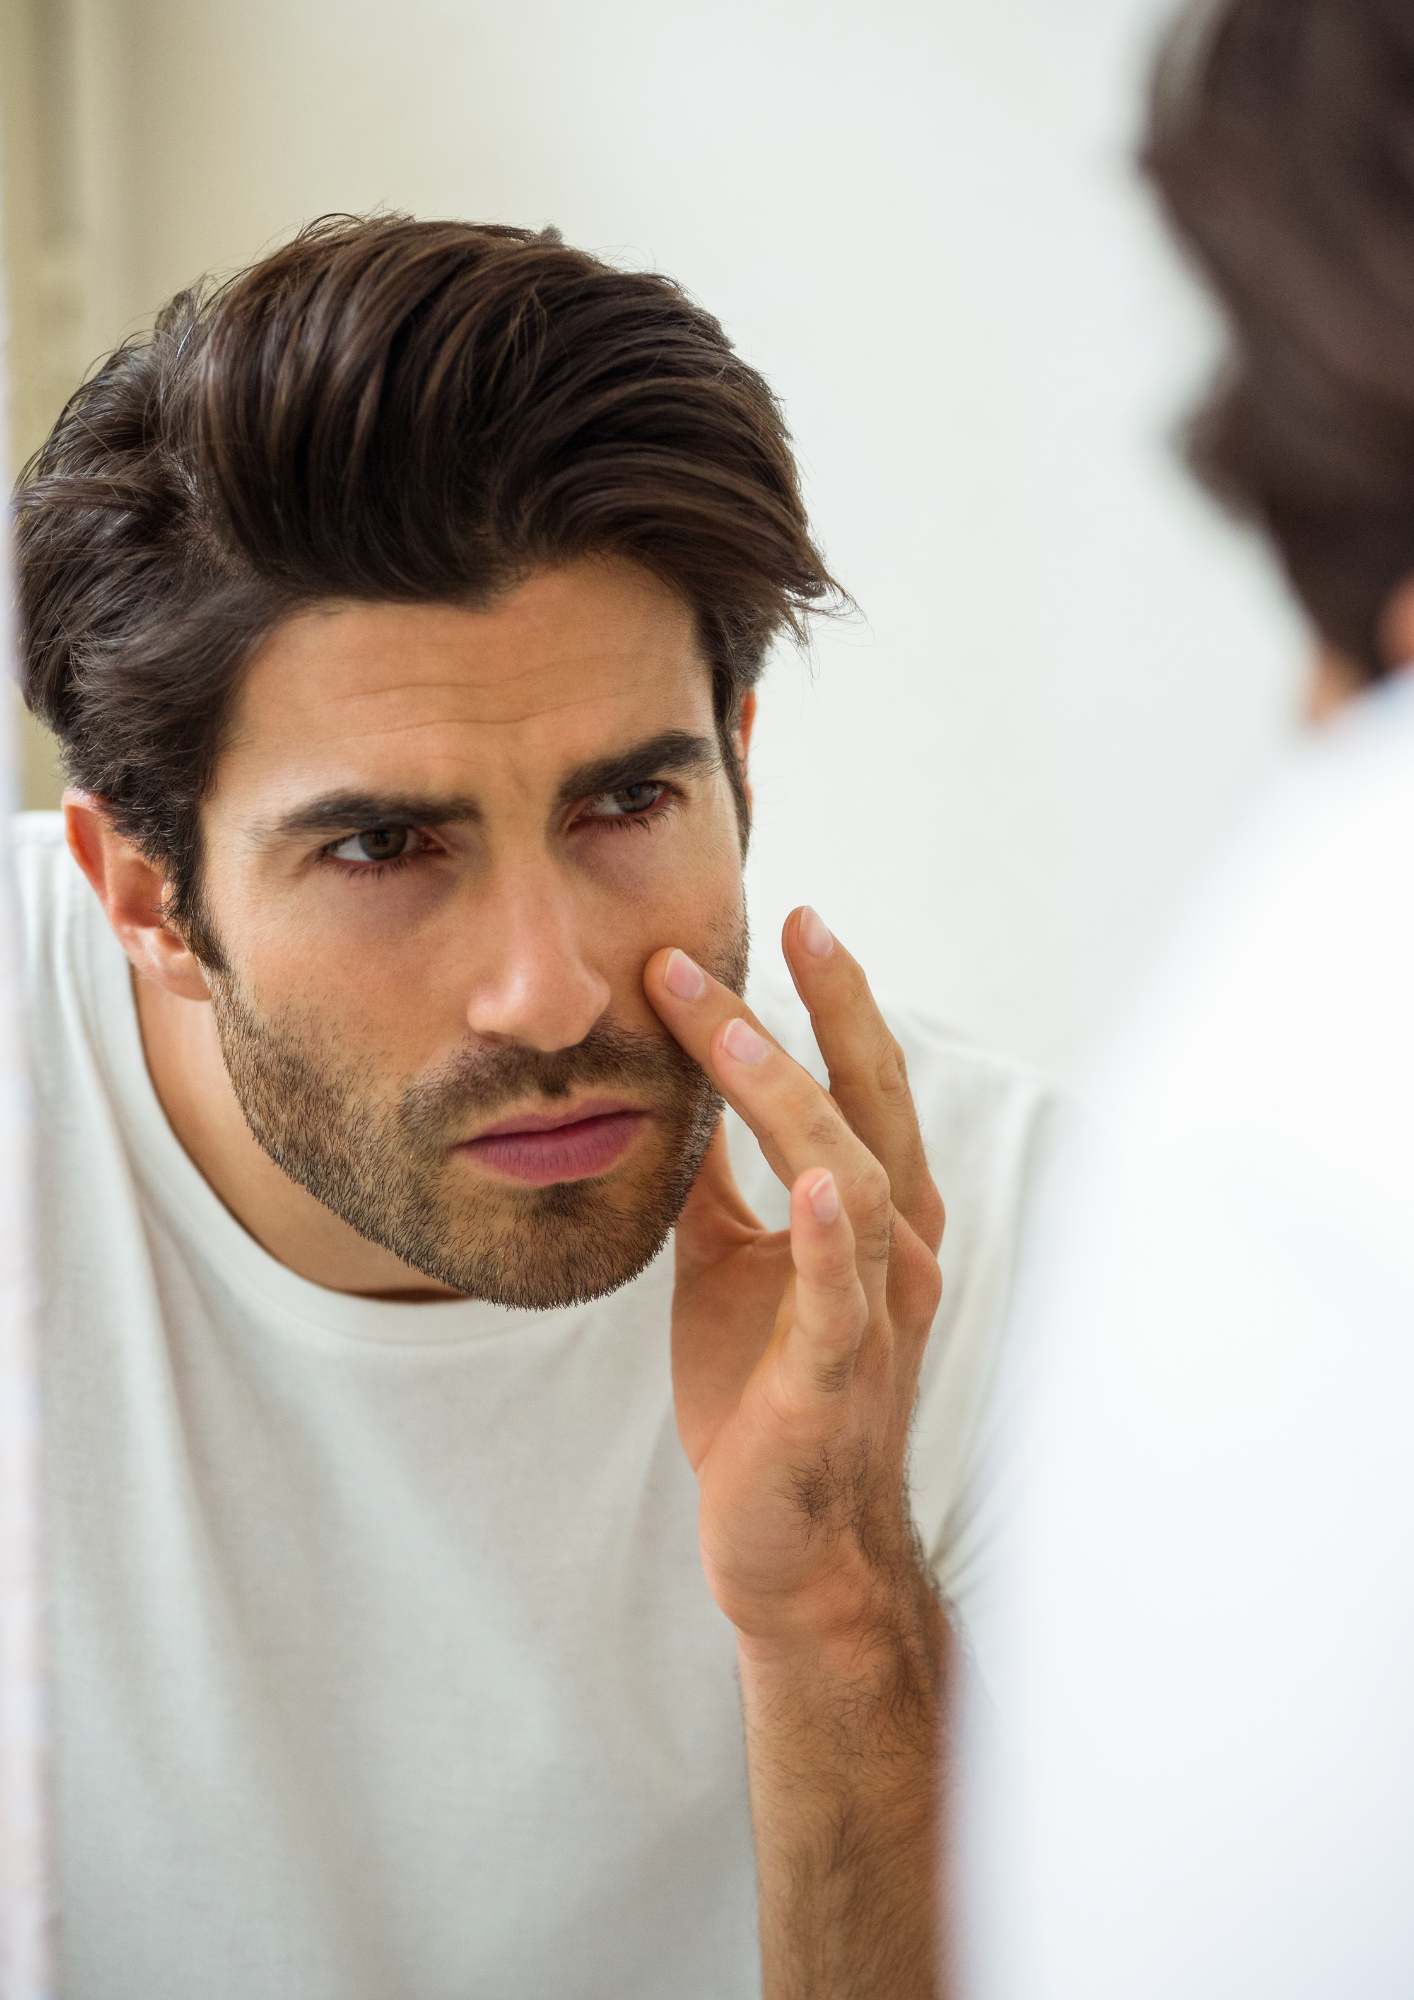 The Essential Benefits of Collagen for Men